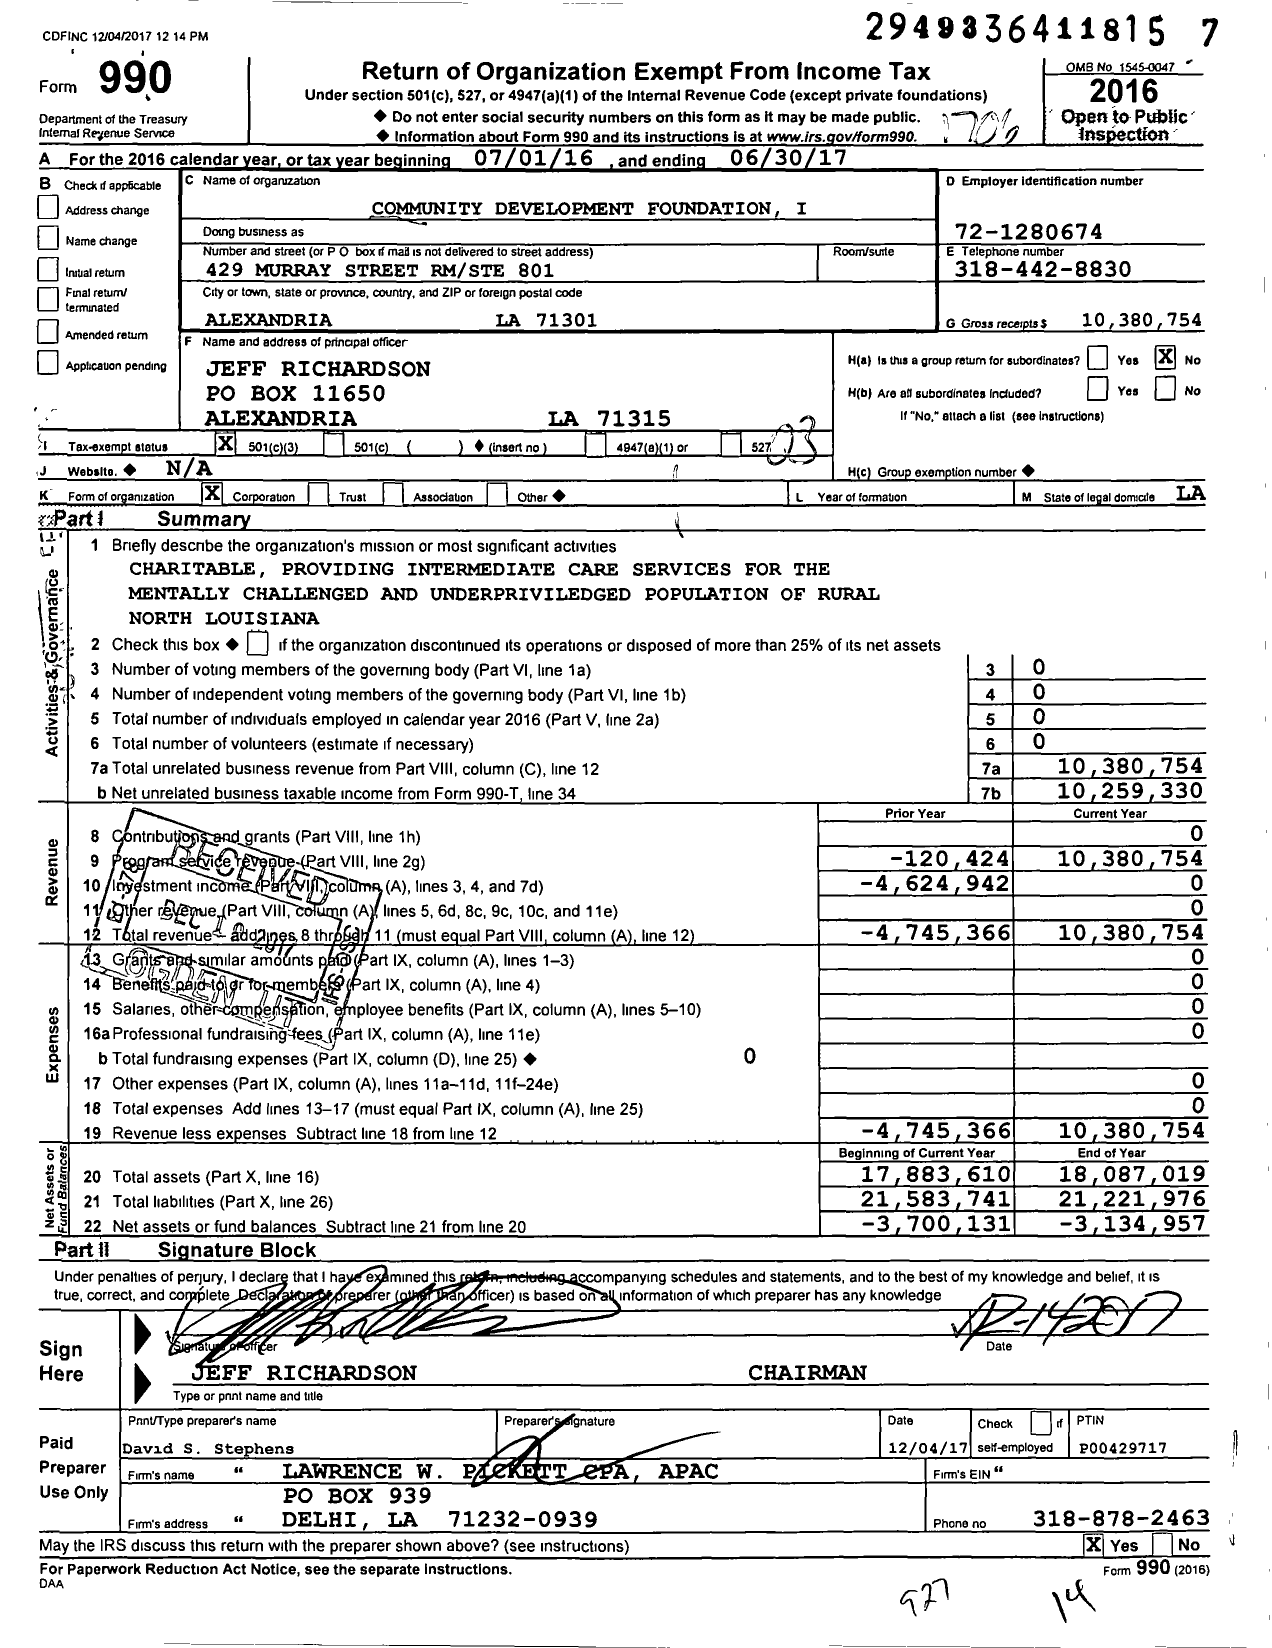 Image of first page of 2016 Form 990 for Community Development Foundation I